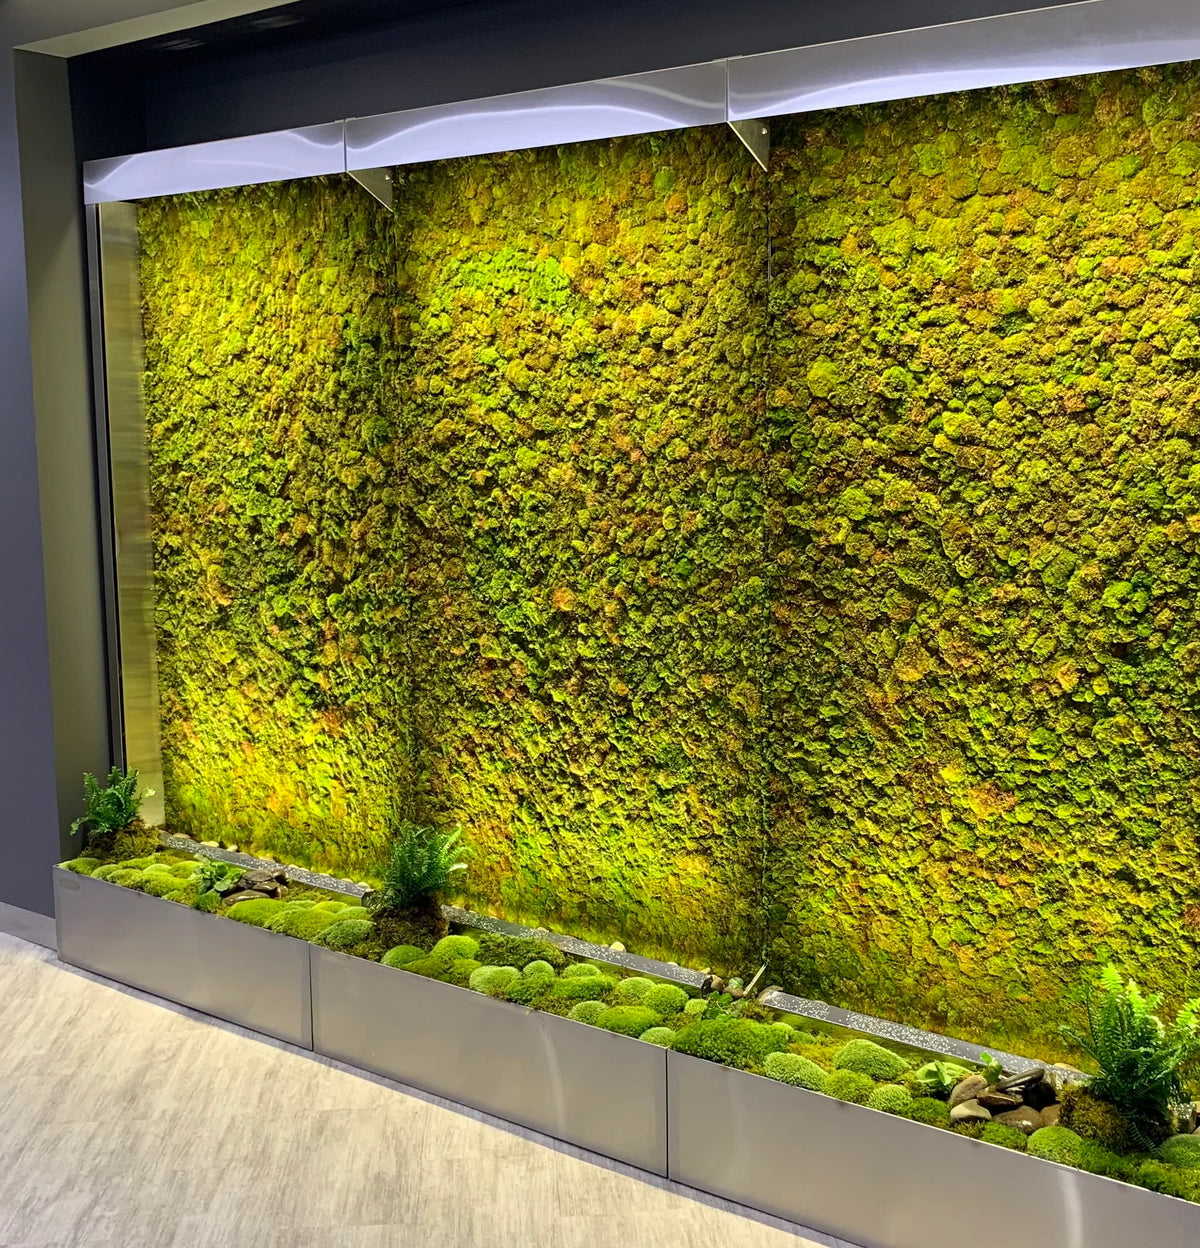 MossAire Living Moss Wall Frame: A Natural Air Filter & Stress Relief –  Moss Acres Biophilic Studio & Workshop